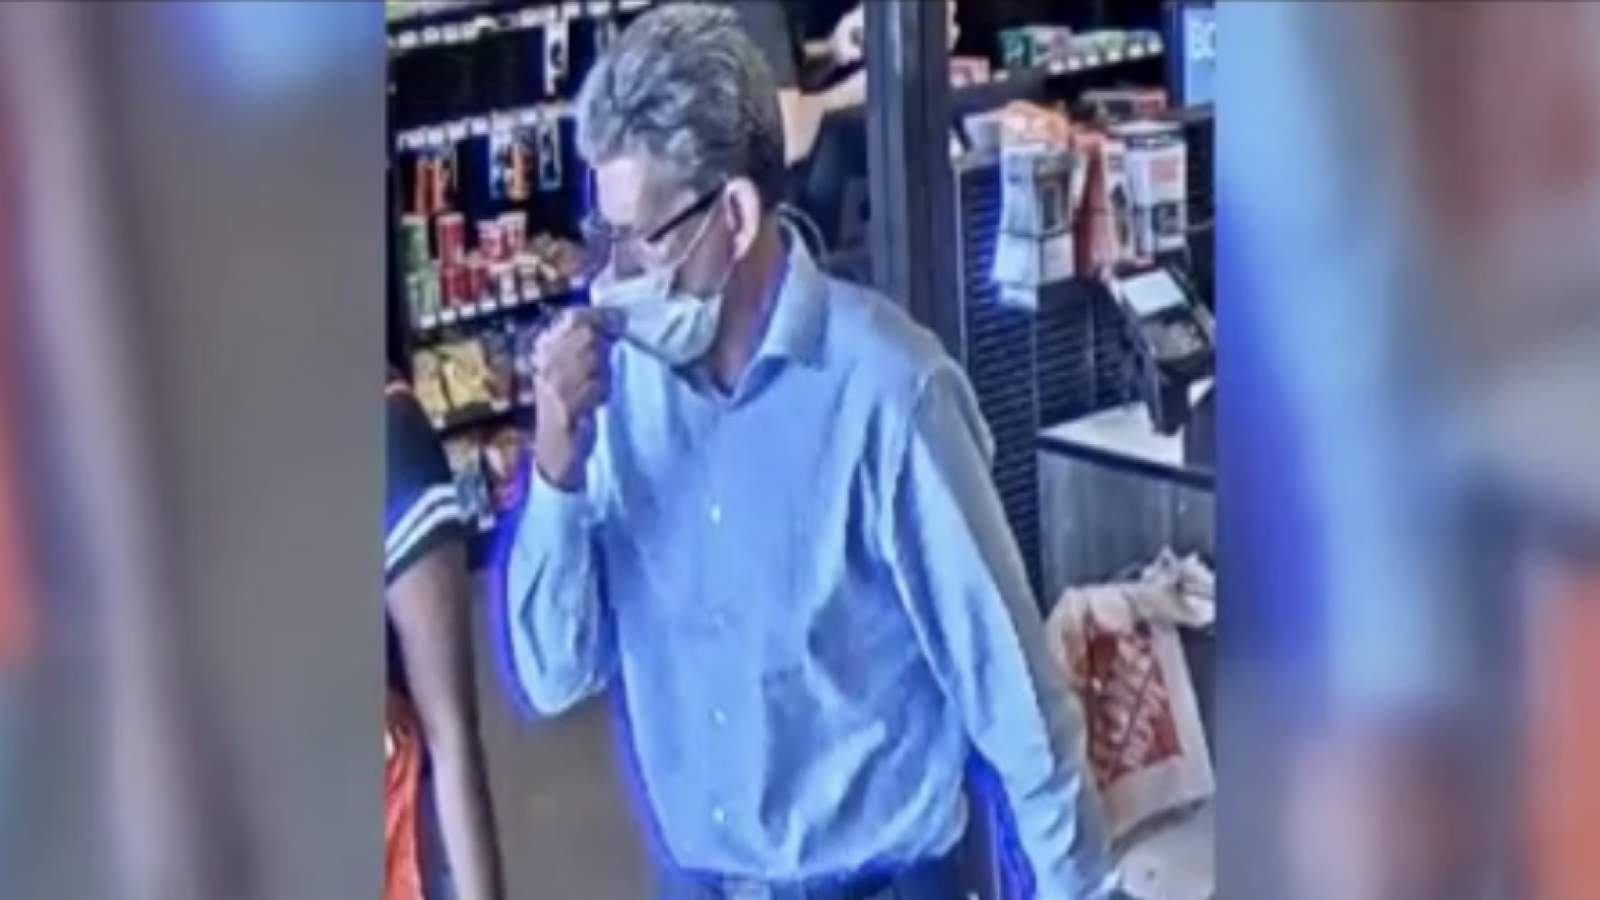 Man wanted in connection to opening 27 fraudulent accounts at Home Depot